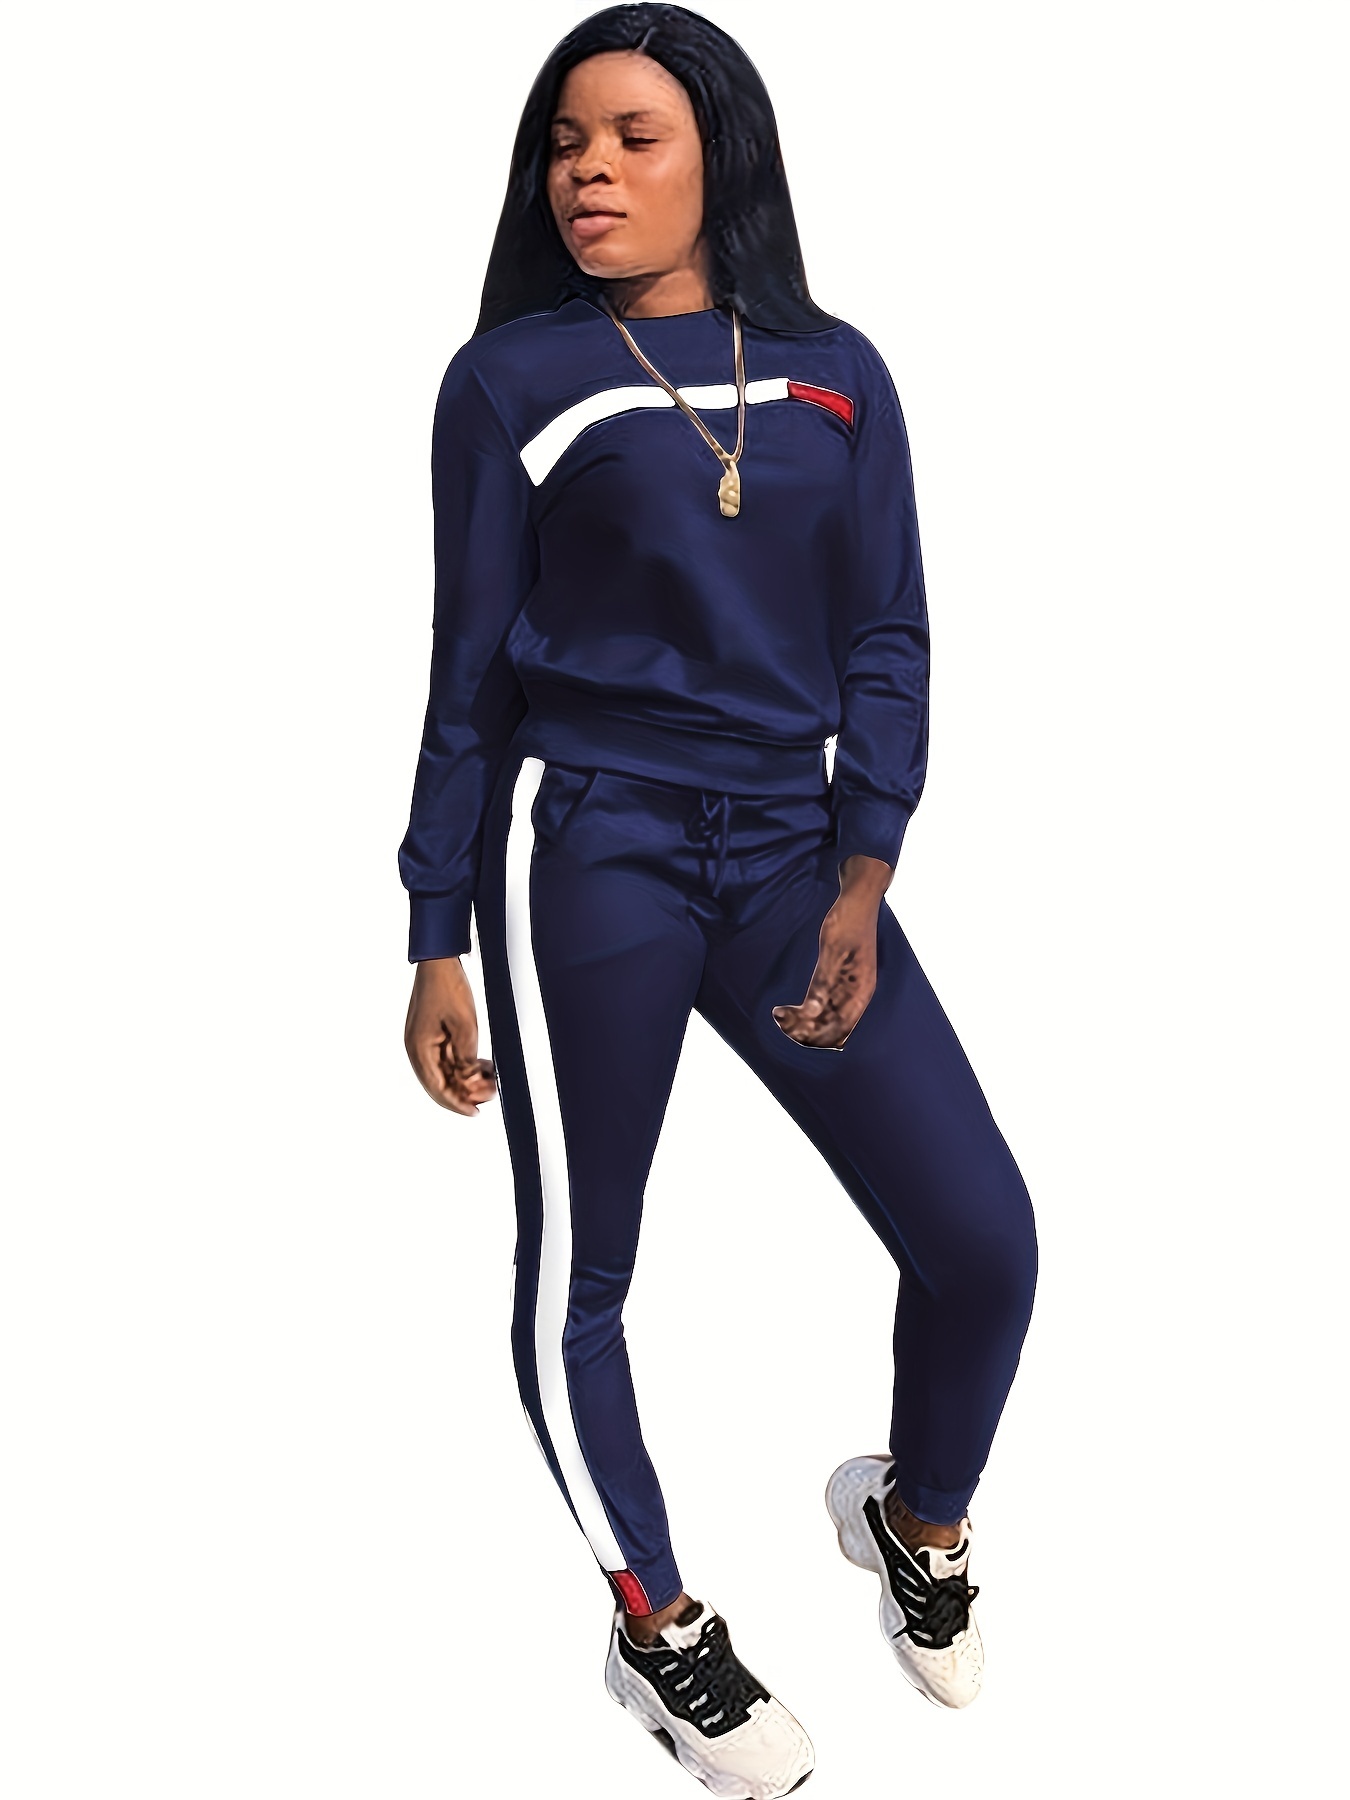 Women's Royal Blue Sporty Stretchy Hoodie and Legging Set